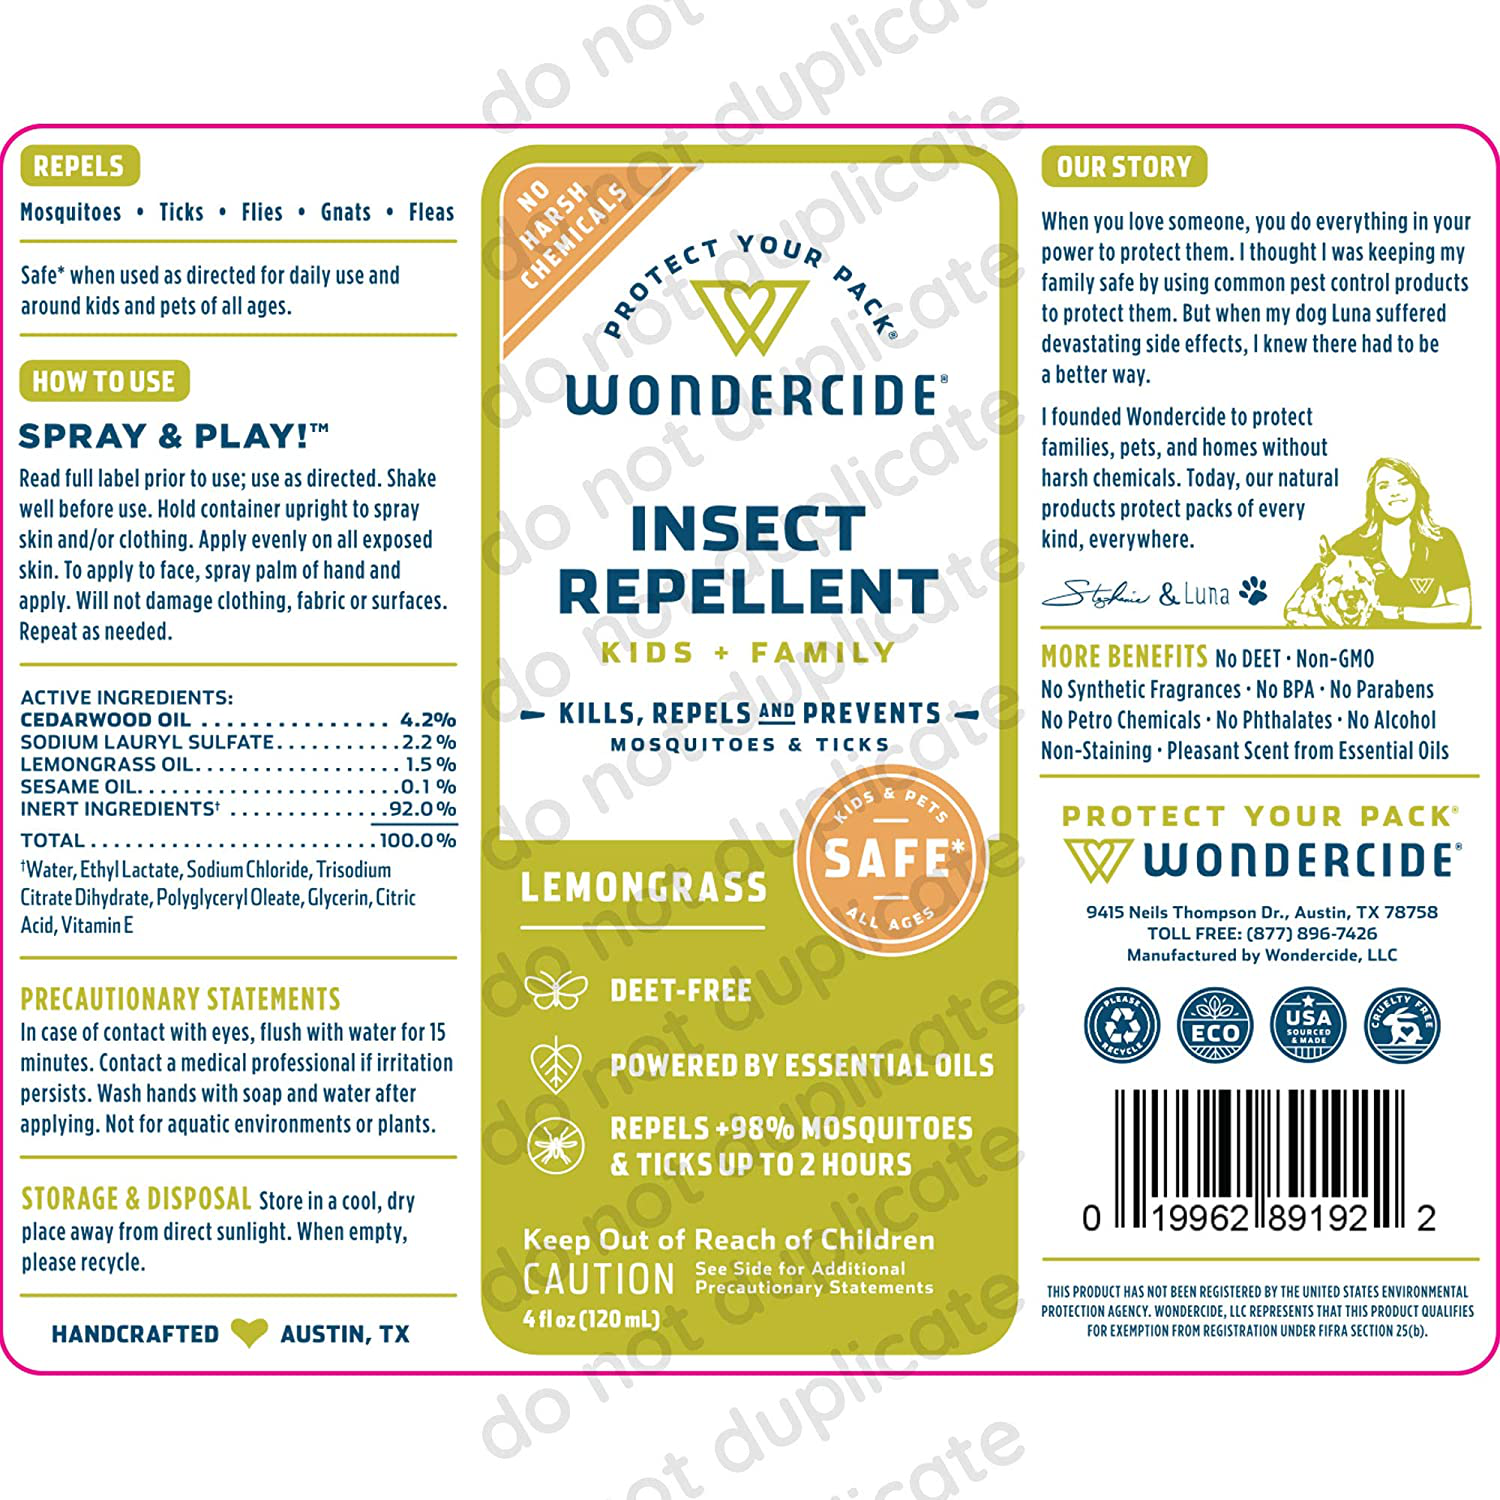 Wondercide - Mosquito, Tick, and Insect Repellent Spray with Natural Essential Oils - DEET-Free Plant-Based Bug Spray and Killer - Safe for Kids, Babies, and People - Rosemary 2-Pack of 4 oz